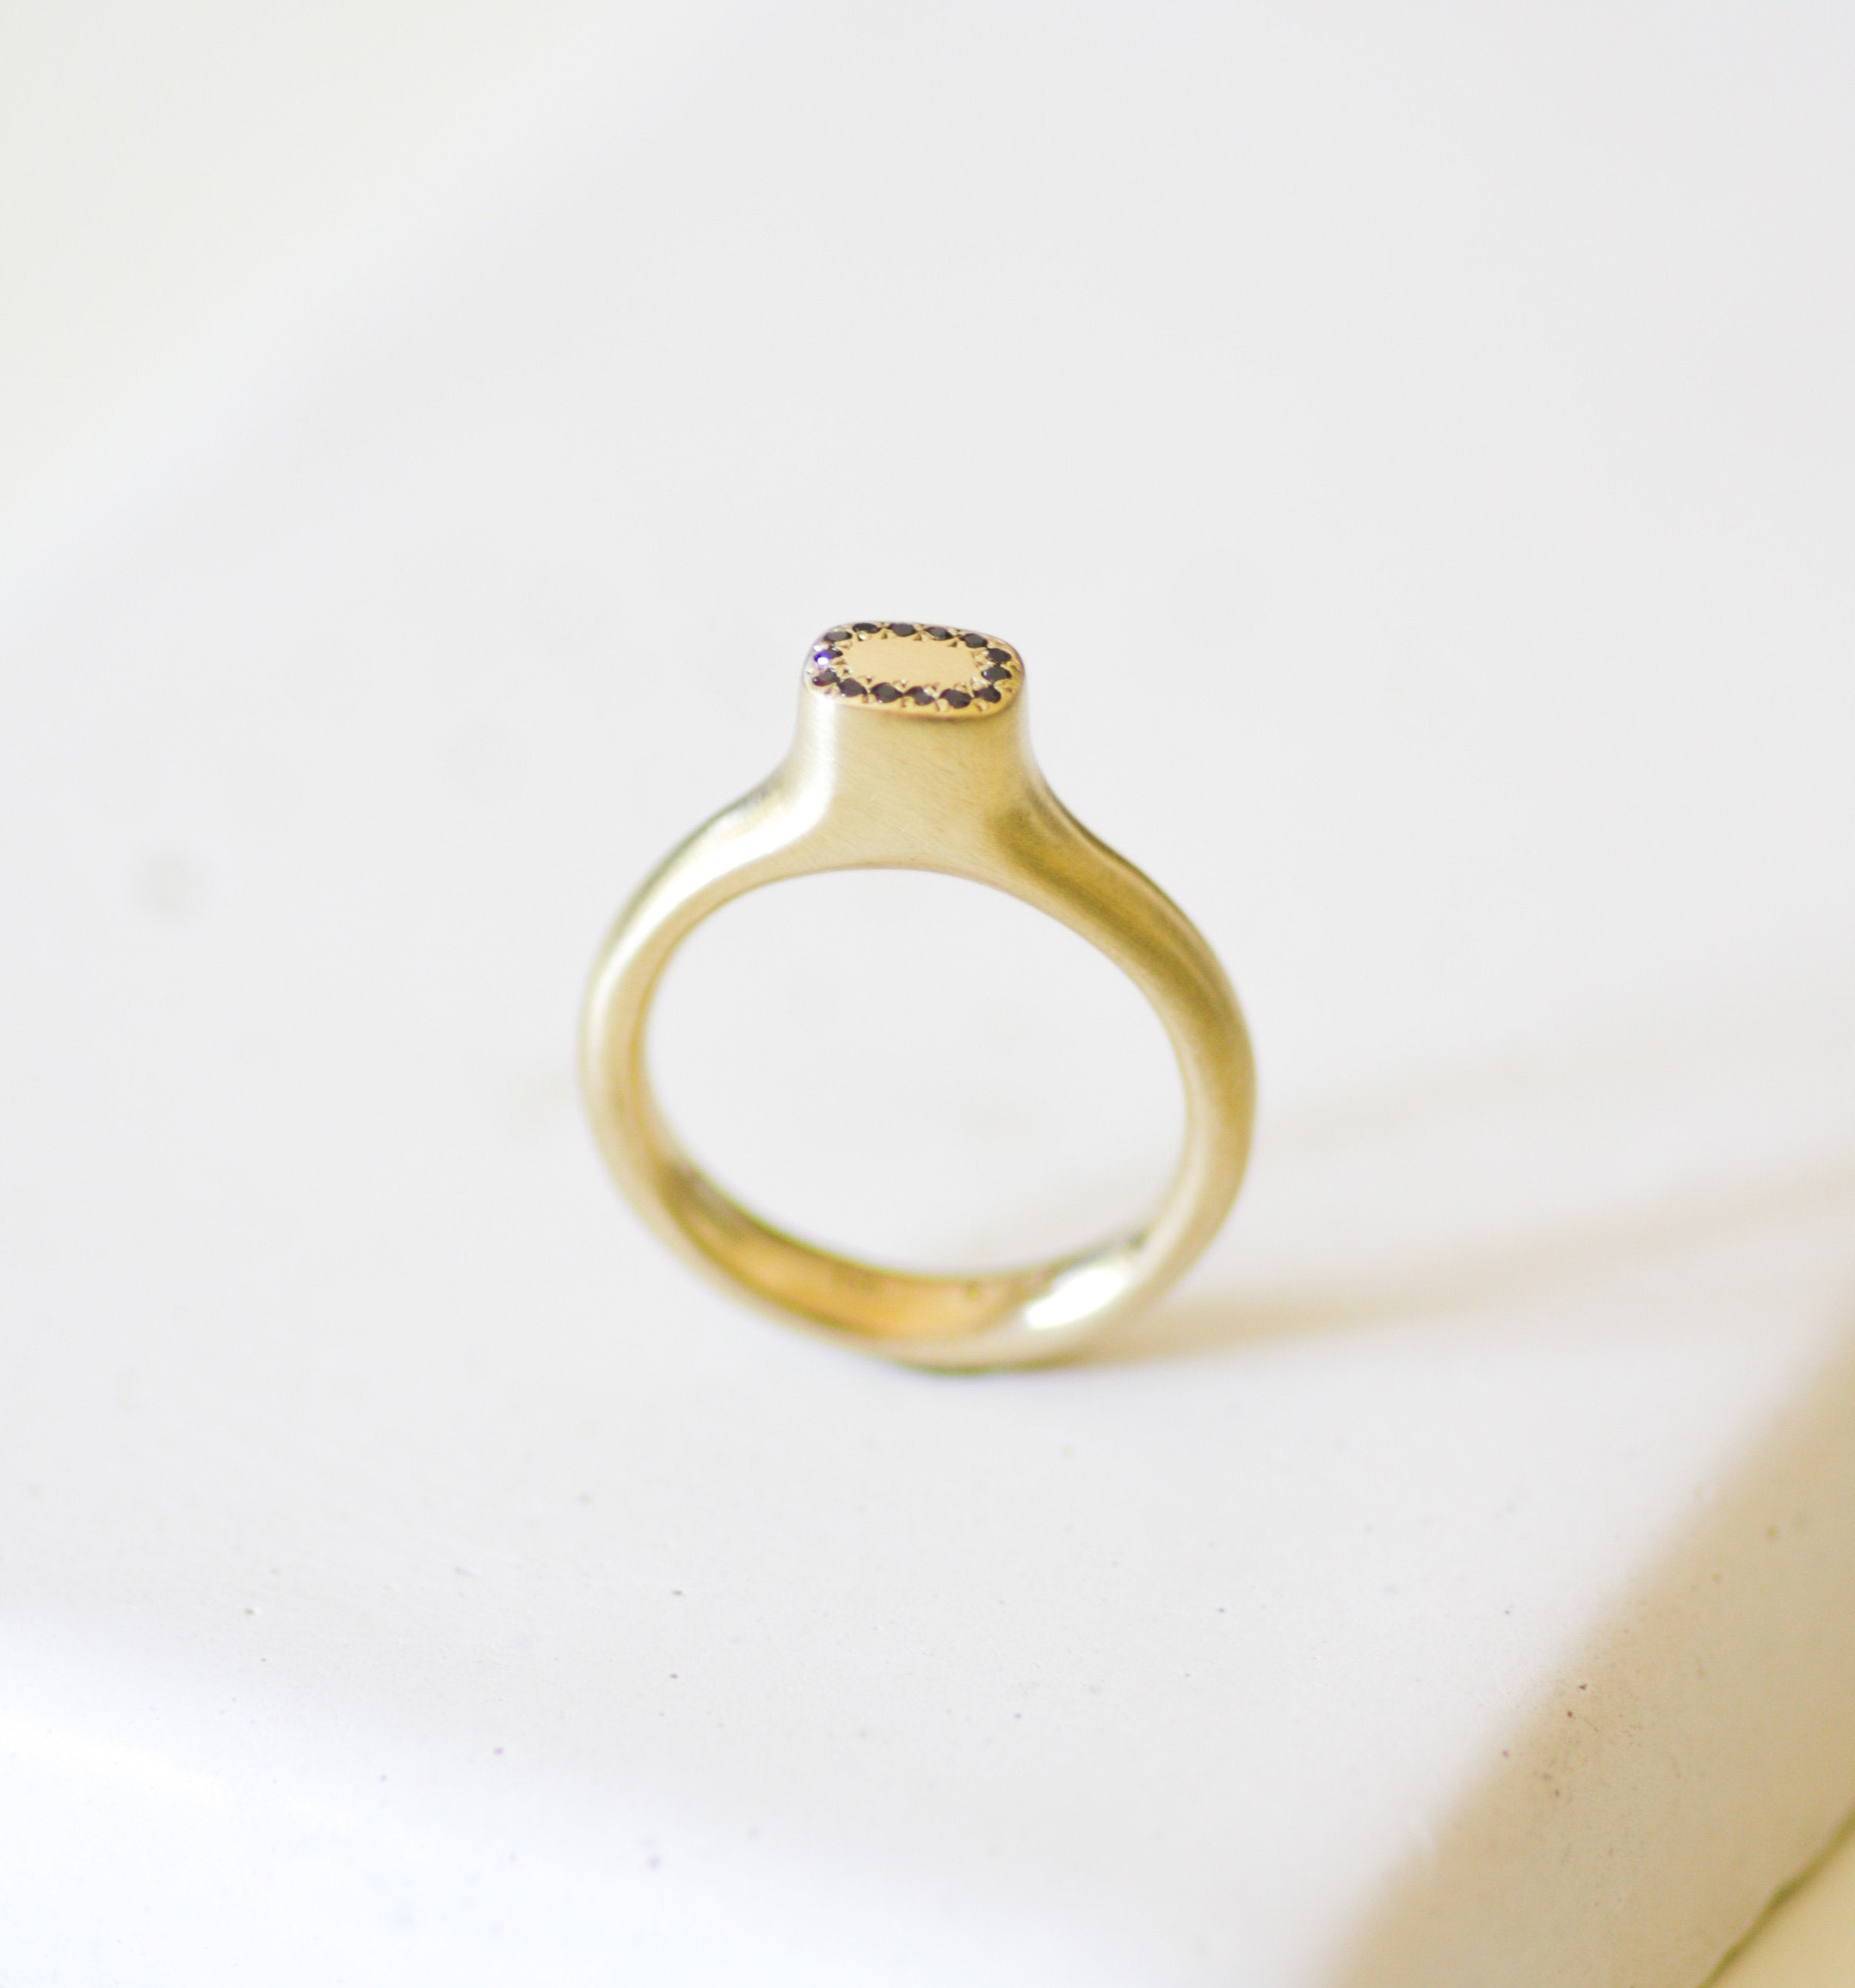 Dainty Signet 14K Gold Ring with Black Diamonds / Solid Gold Top Ring - hs